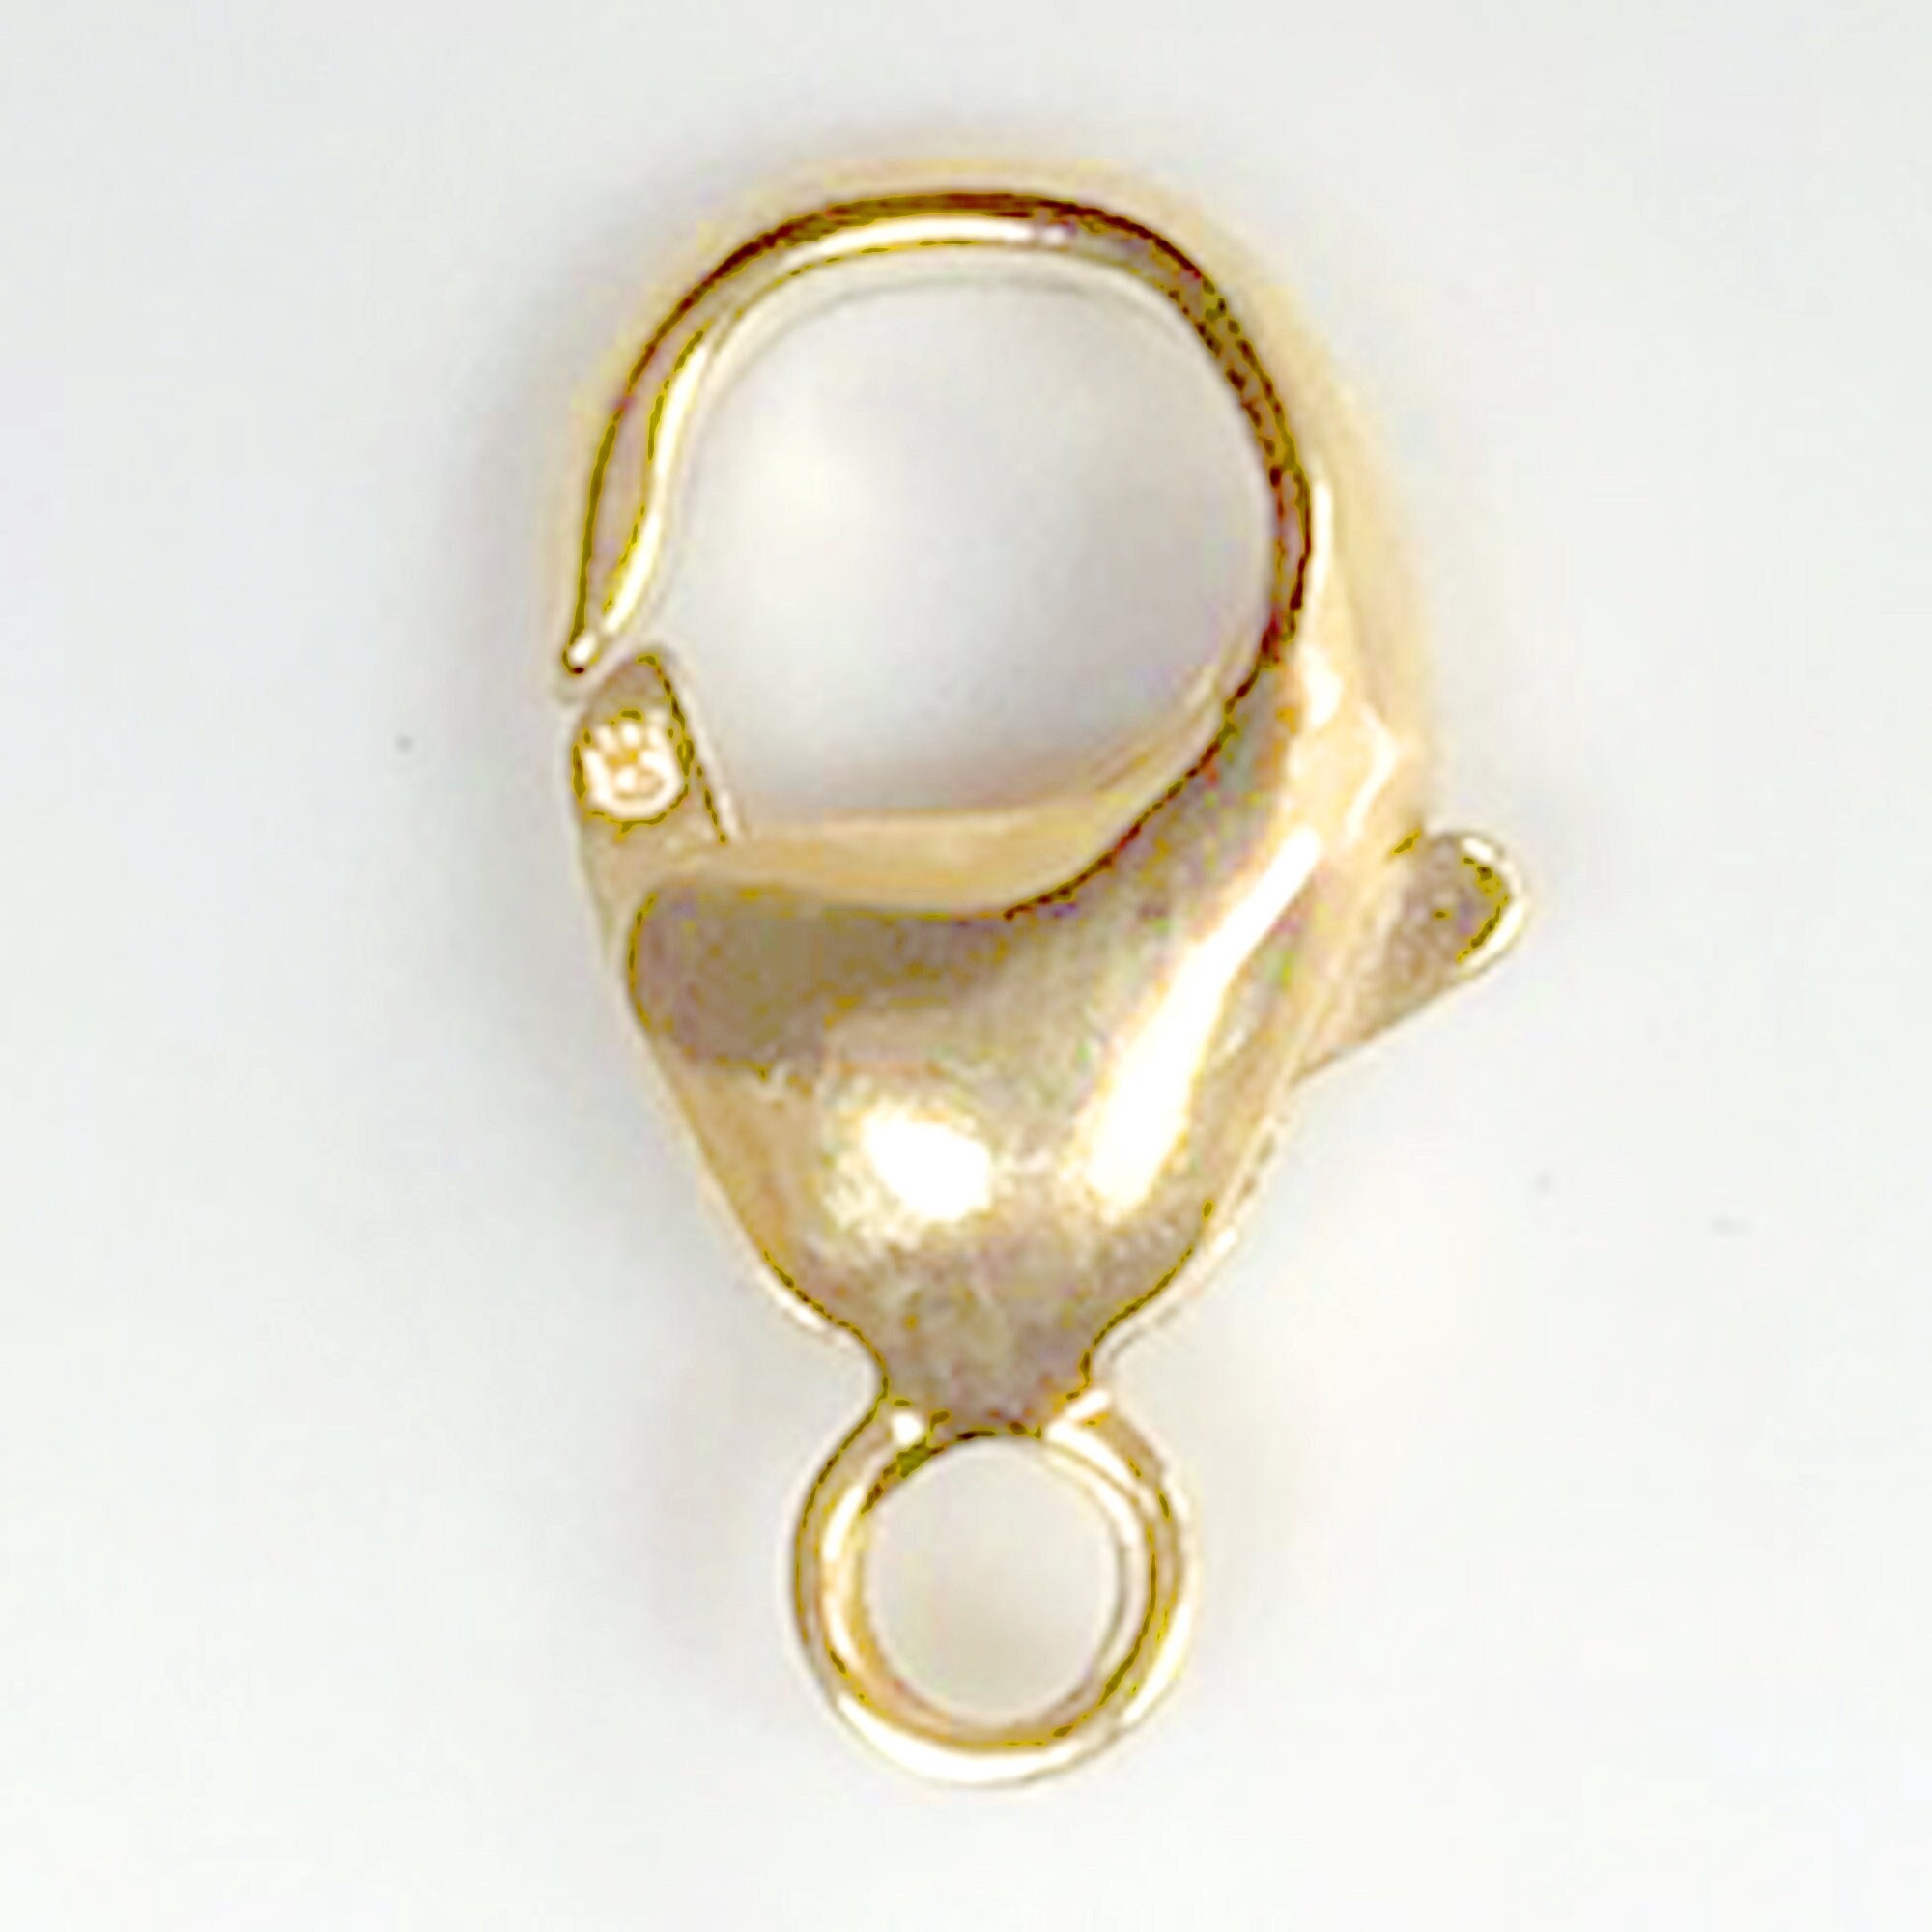 Large Lobster claw clasp, goldtone, 01204, jewelry making supplies,  bsueboutiques, embellishment, vintage jewelry supplies, lobster claw,  clasp, gold